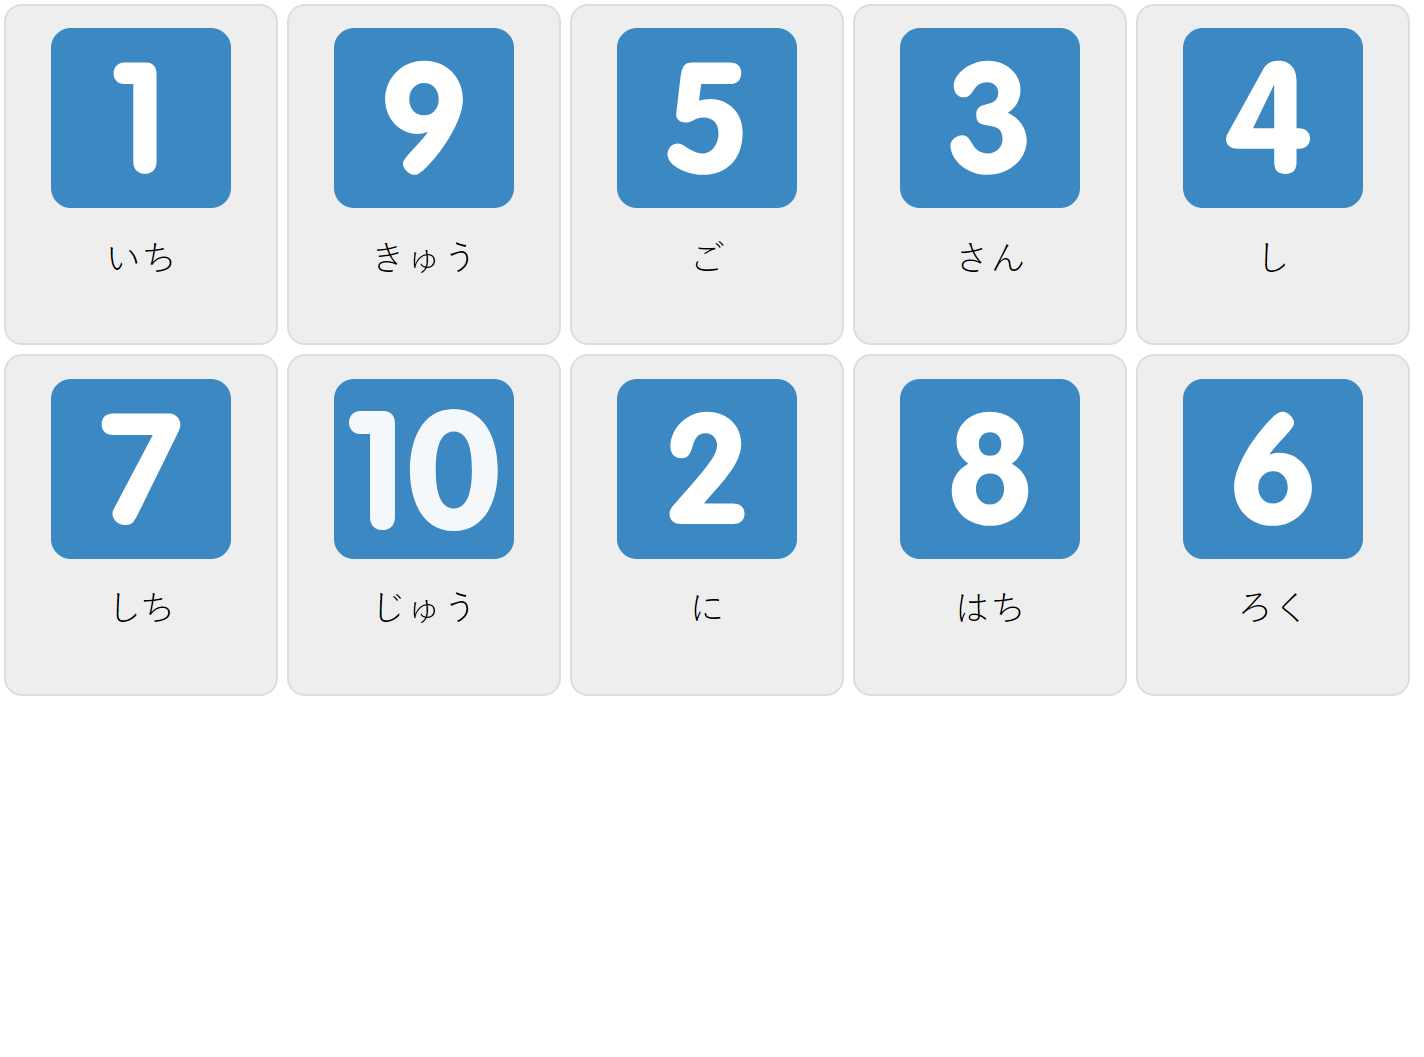 Numbers 1-10 in Japanese